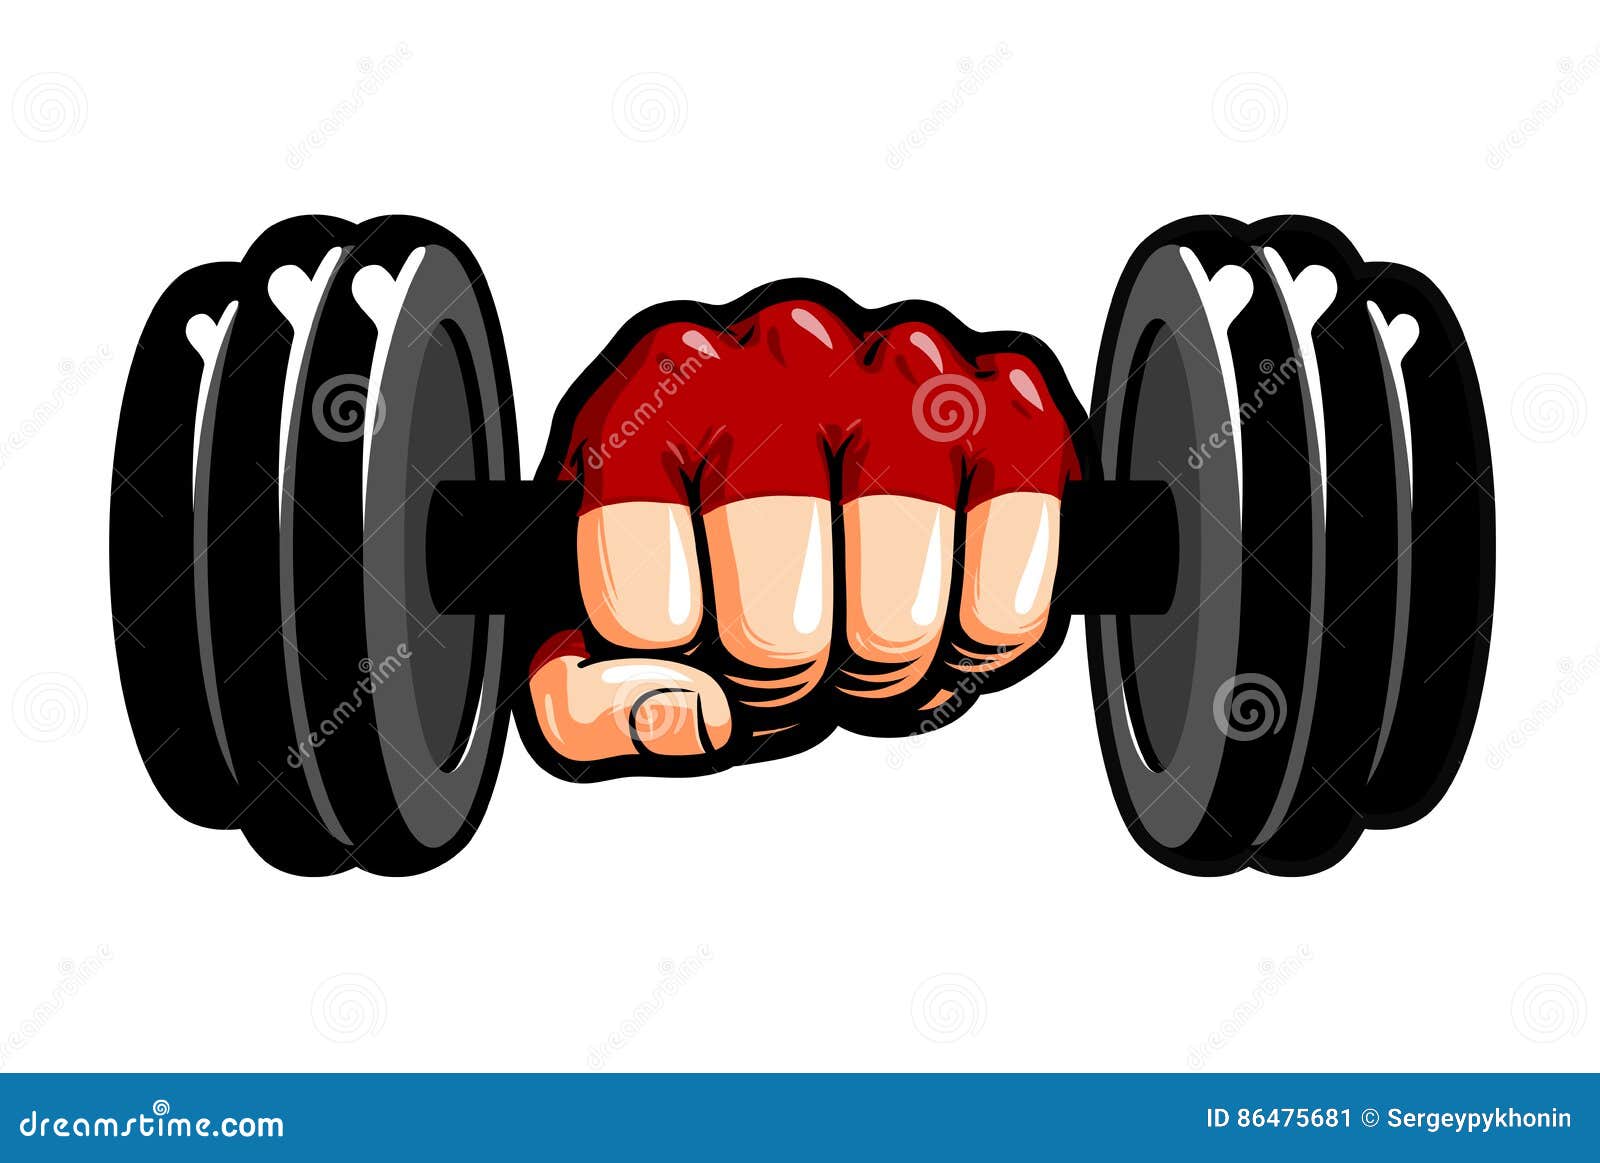 Heavy Dumbbell in Hand, Cartoon. Gym, Bodybuilding, Weightlifting Symbol  Stock Vector - Illustration of gauntlet, exercise: 86475681